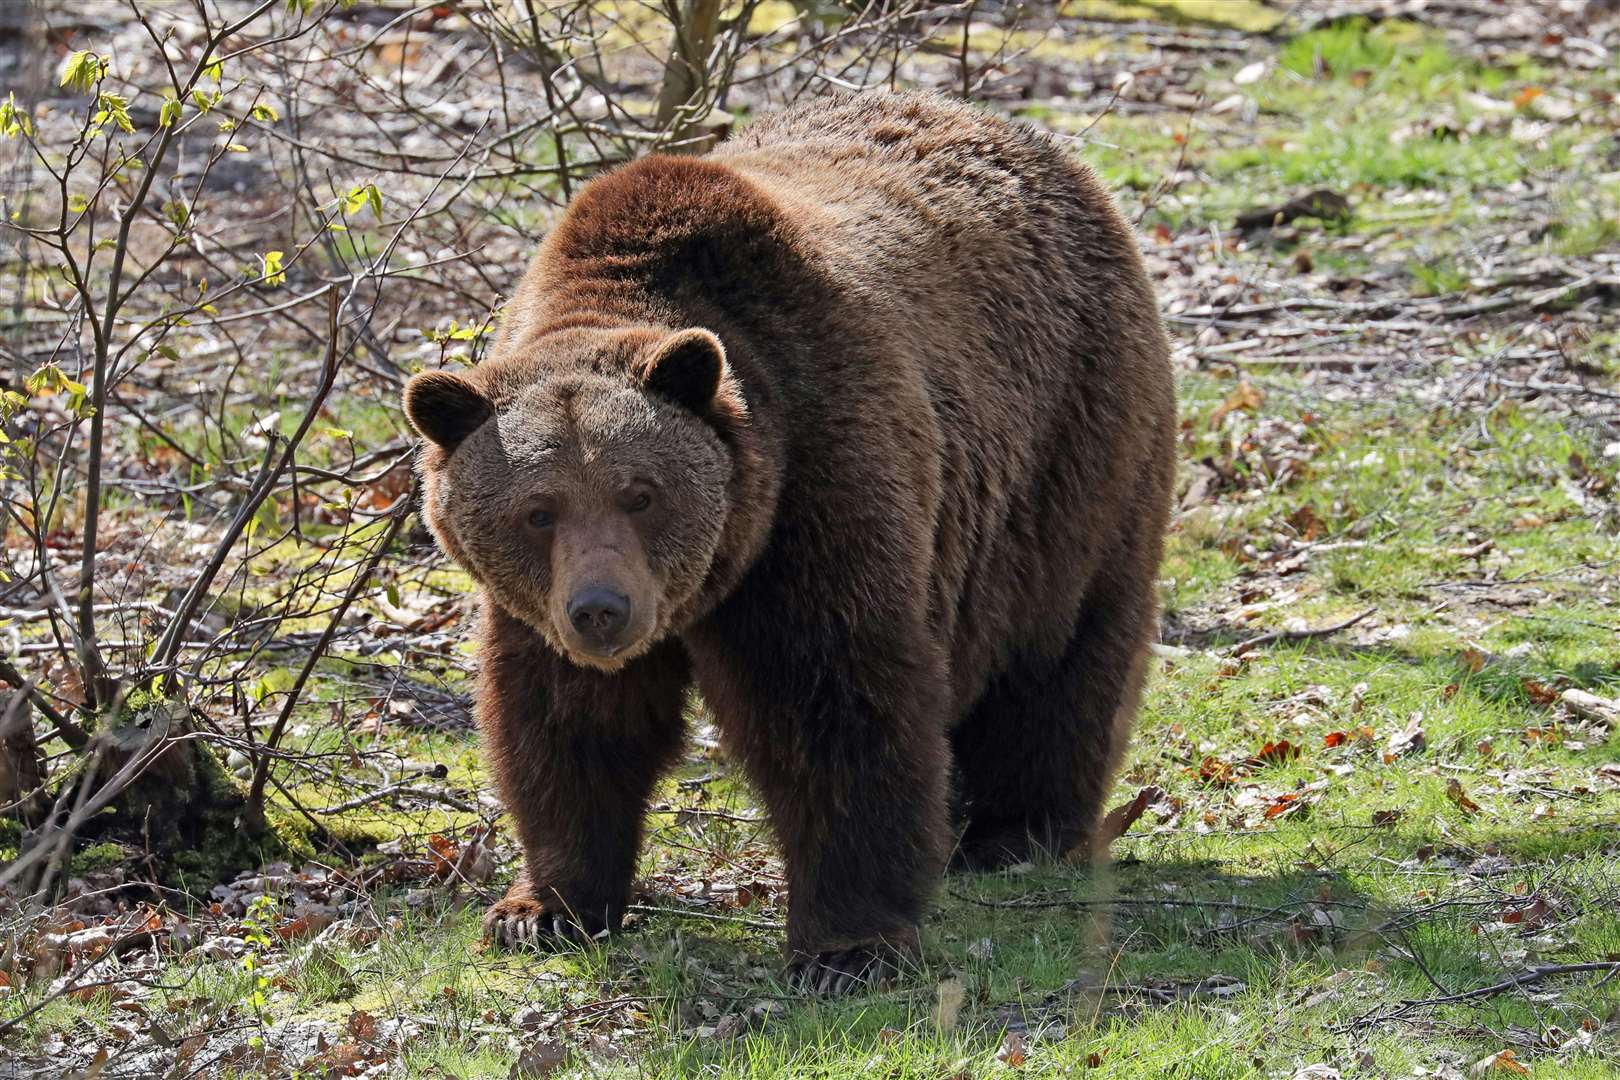 The bears have been at the Kent park for five years